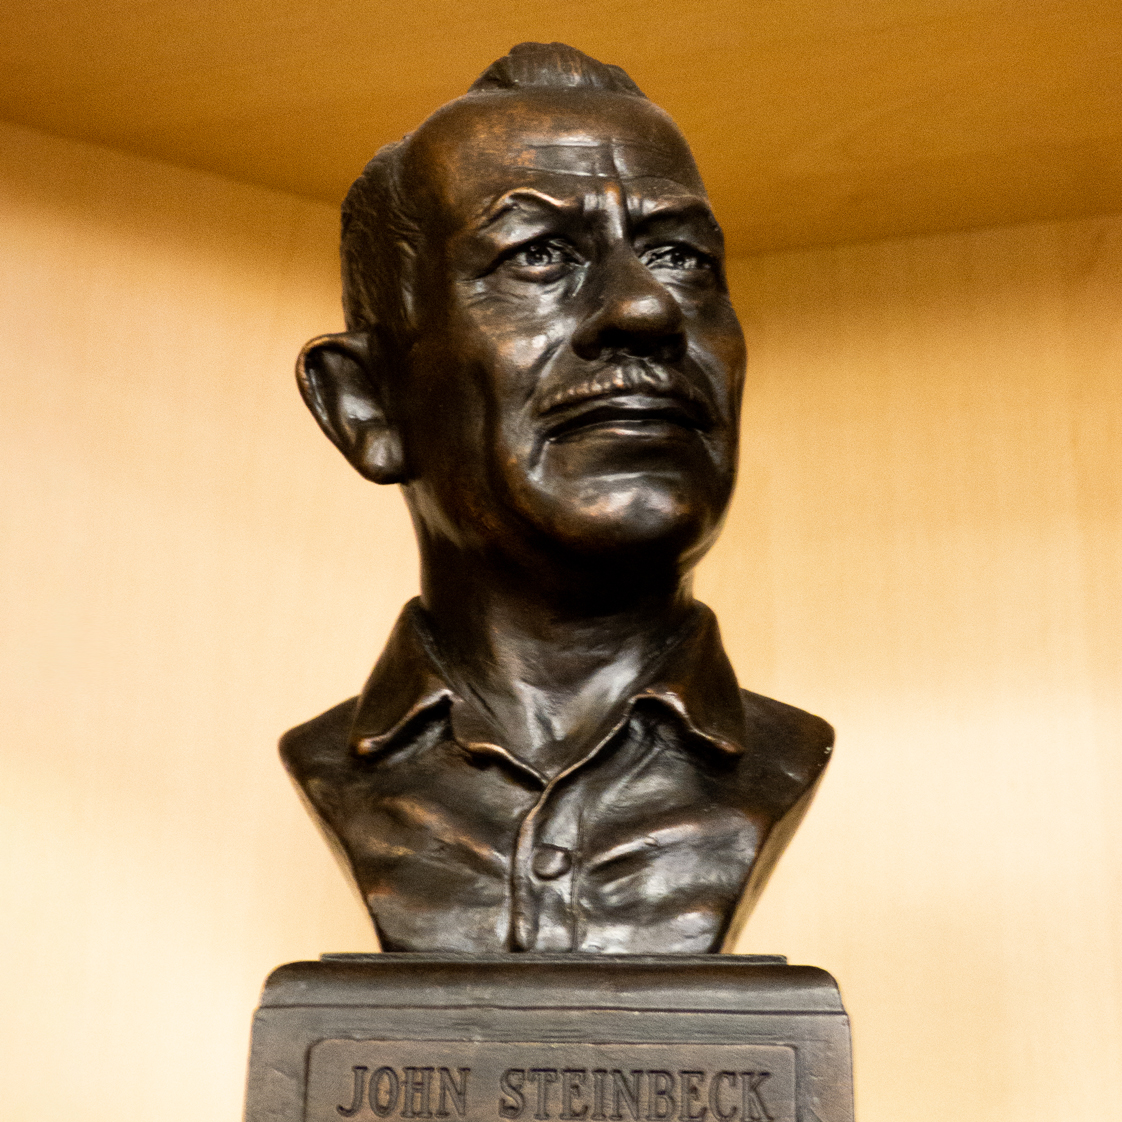 A bust of Steinbeck given as the Steinbeck Award.